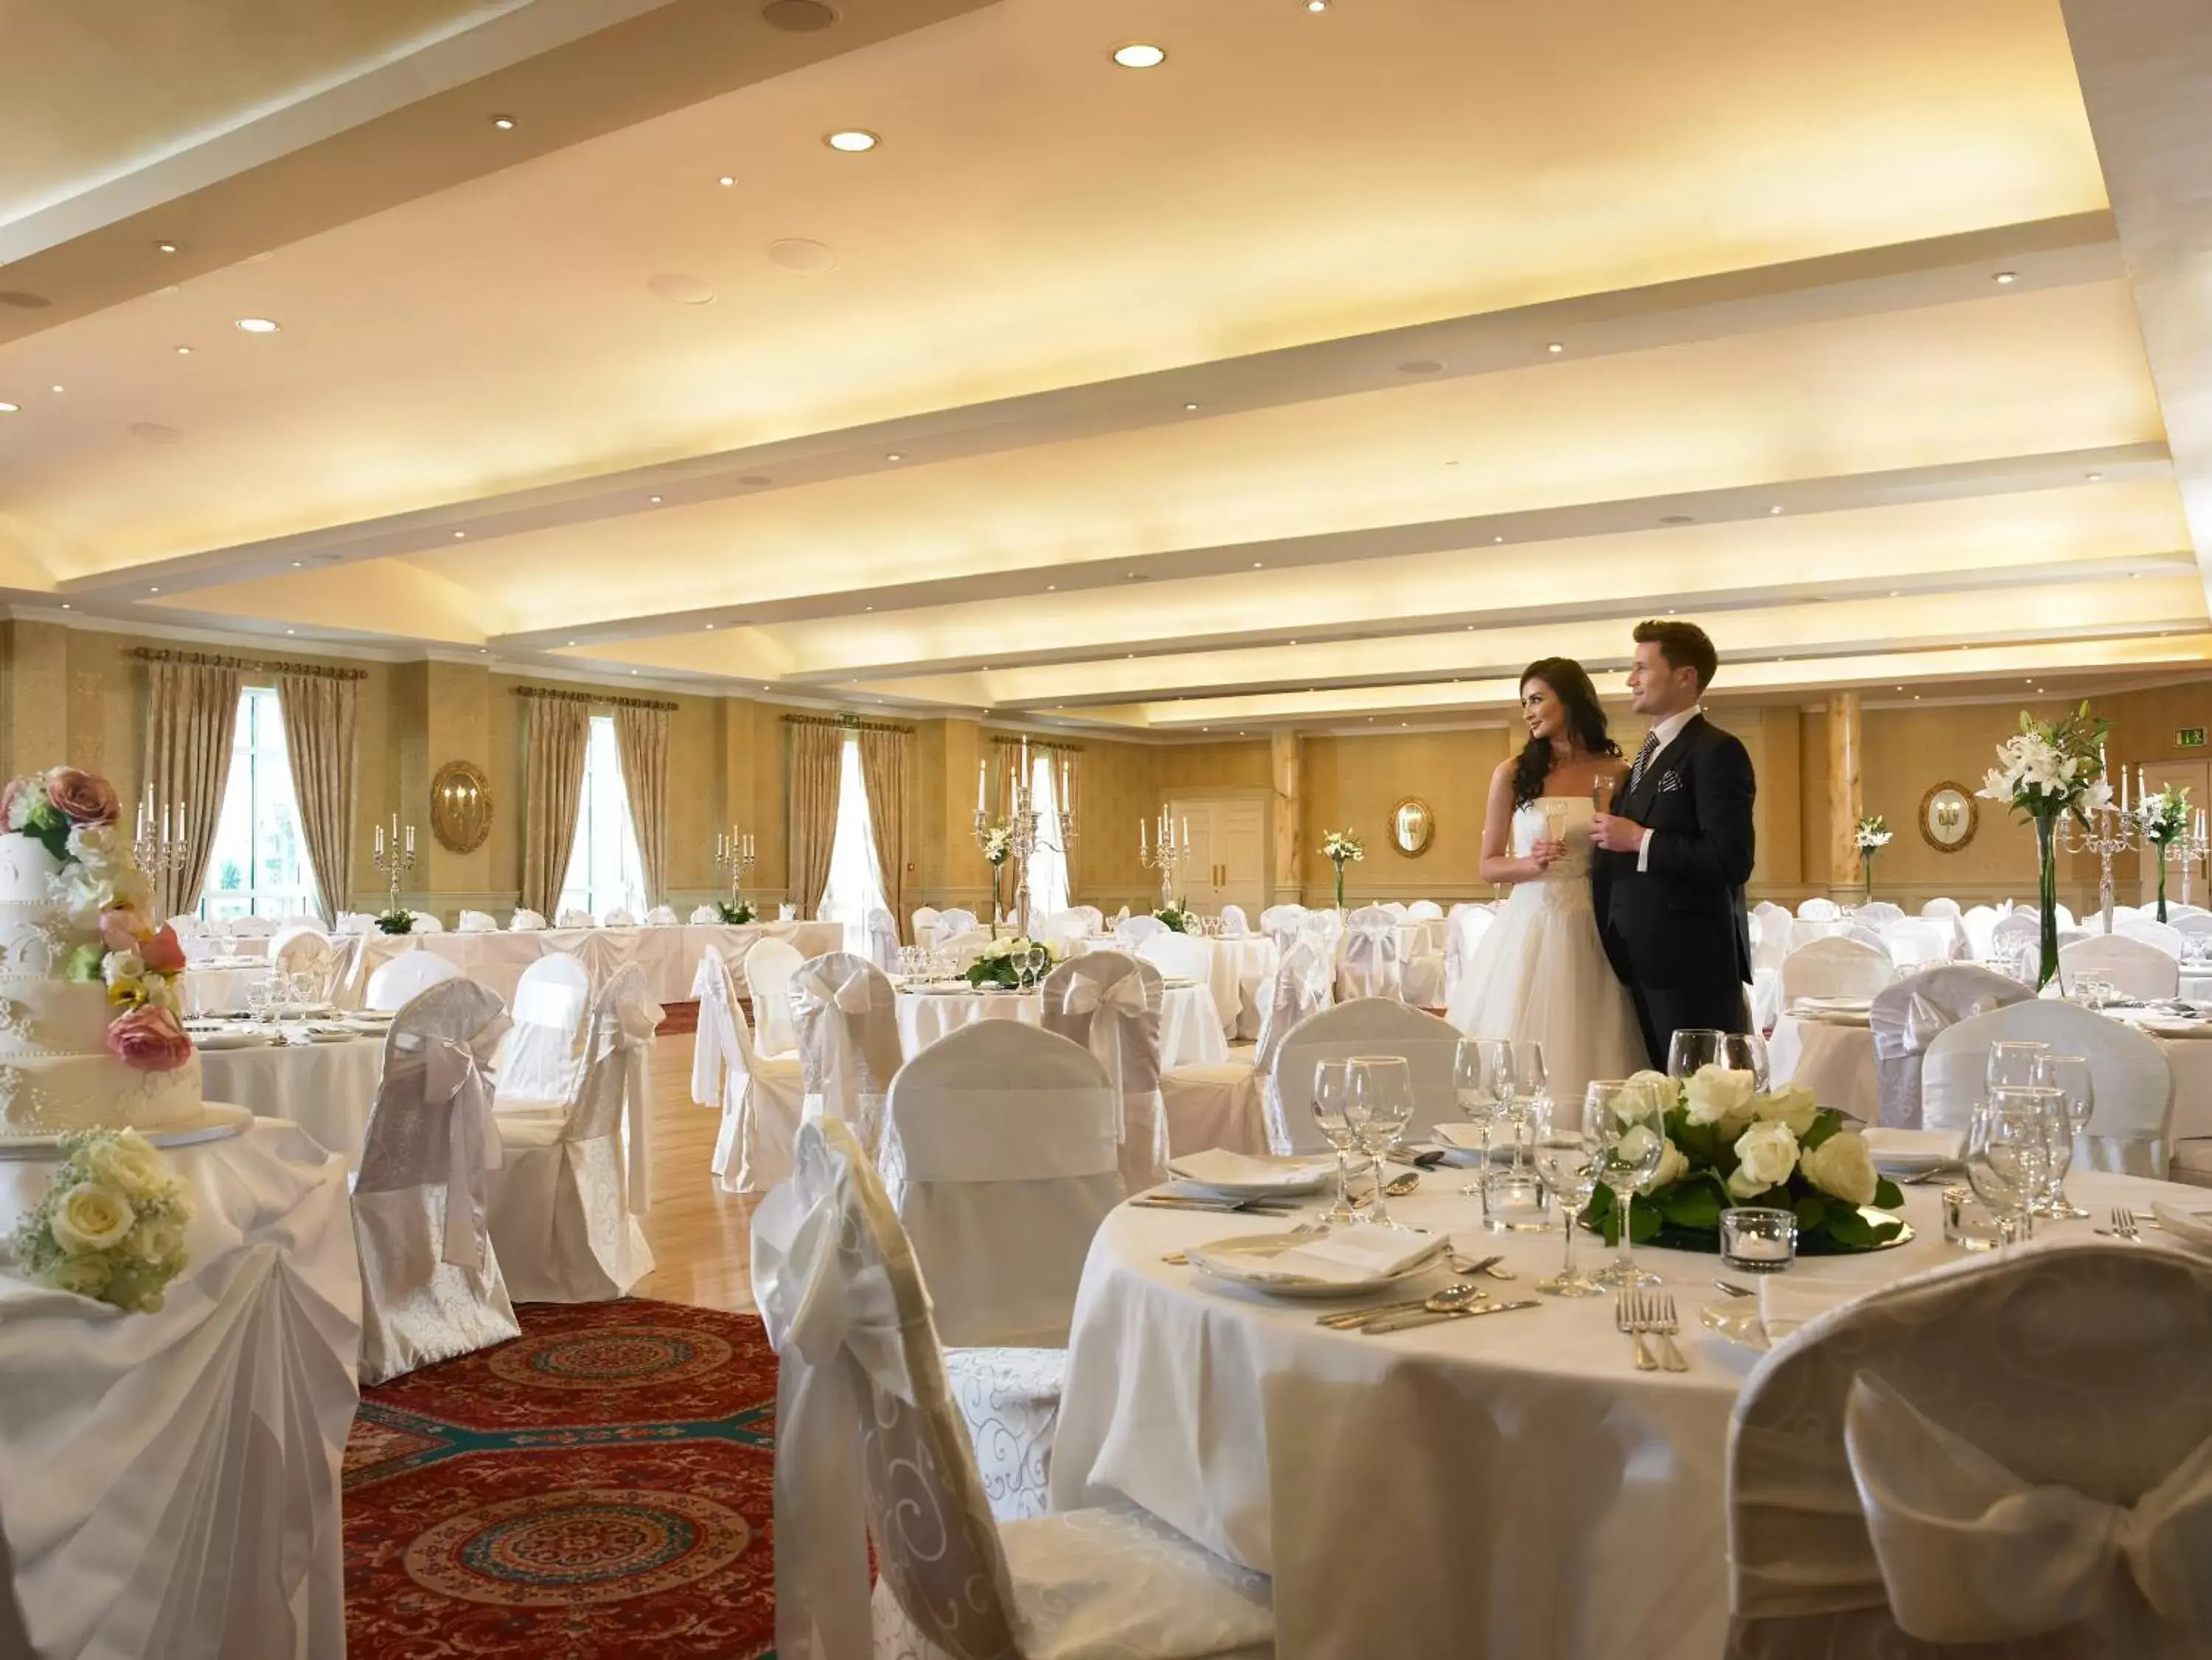 Banquet/Function facilities, Banquet Facilities in Galway Bay Hotel Conference & Leisure Centre